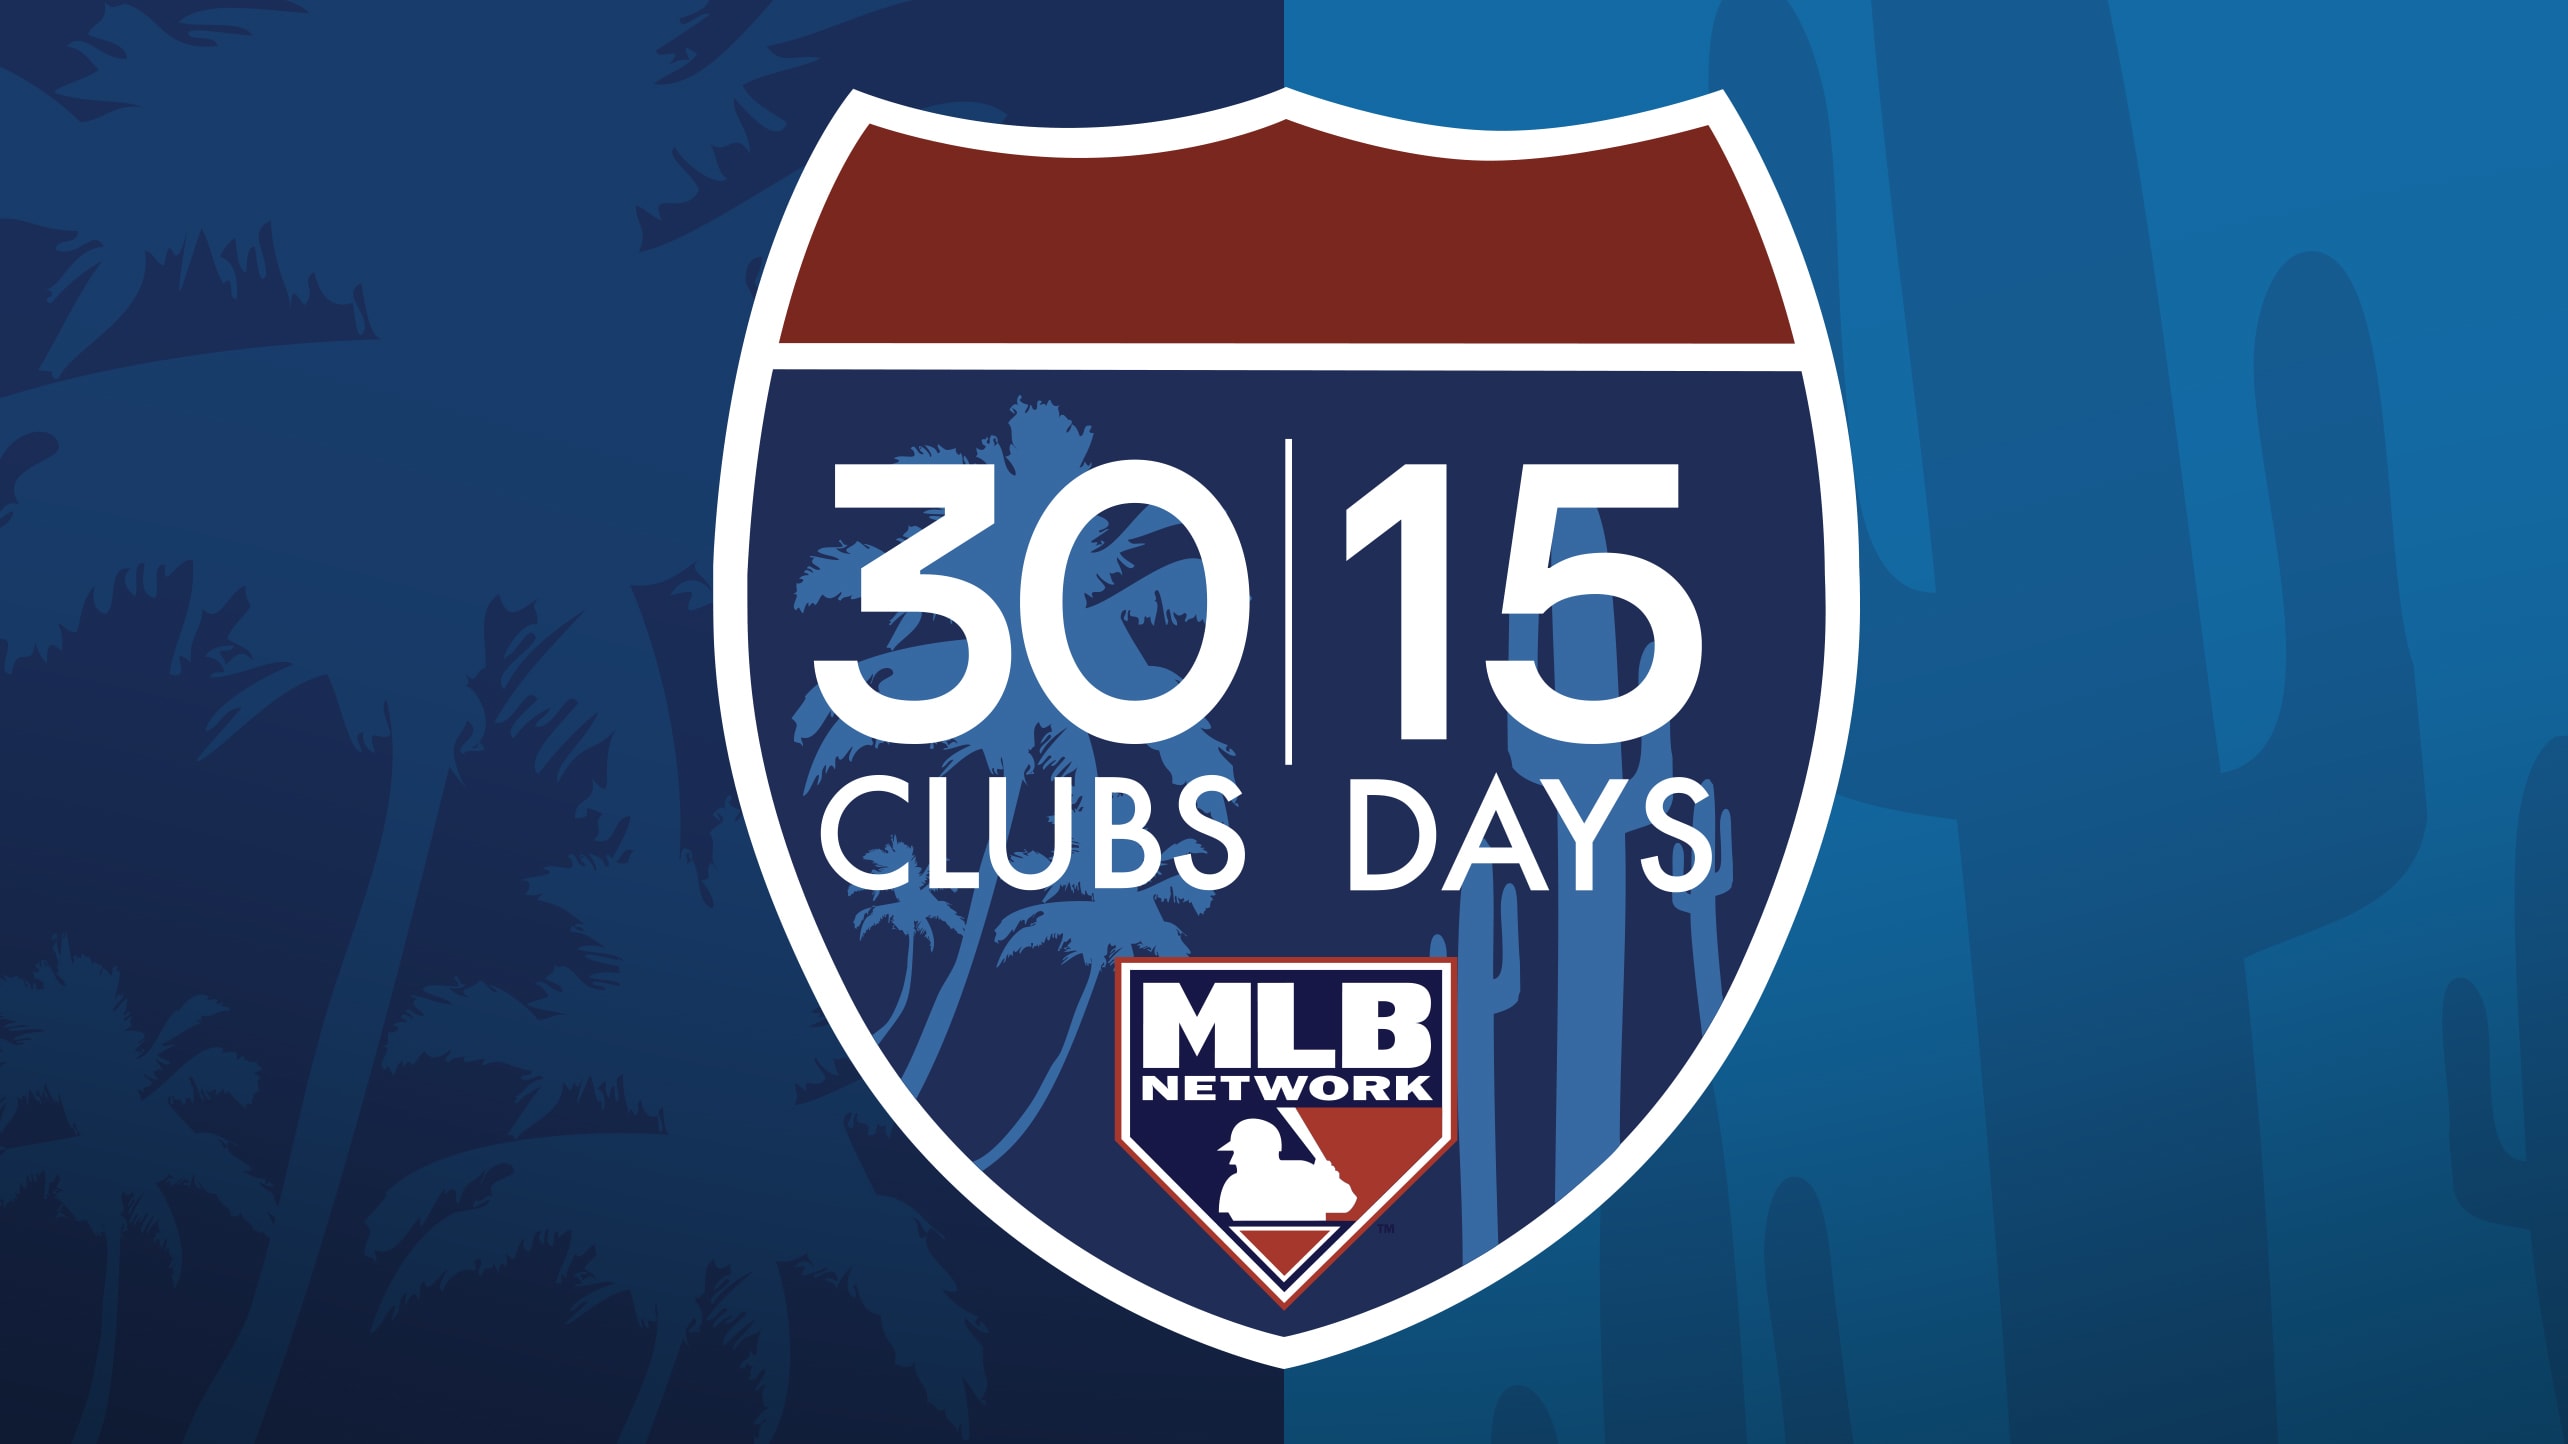 MLB Network's 30 Clubs in 15 Days